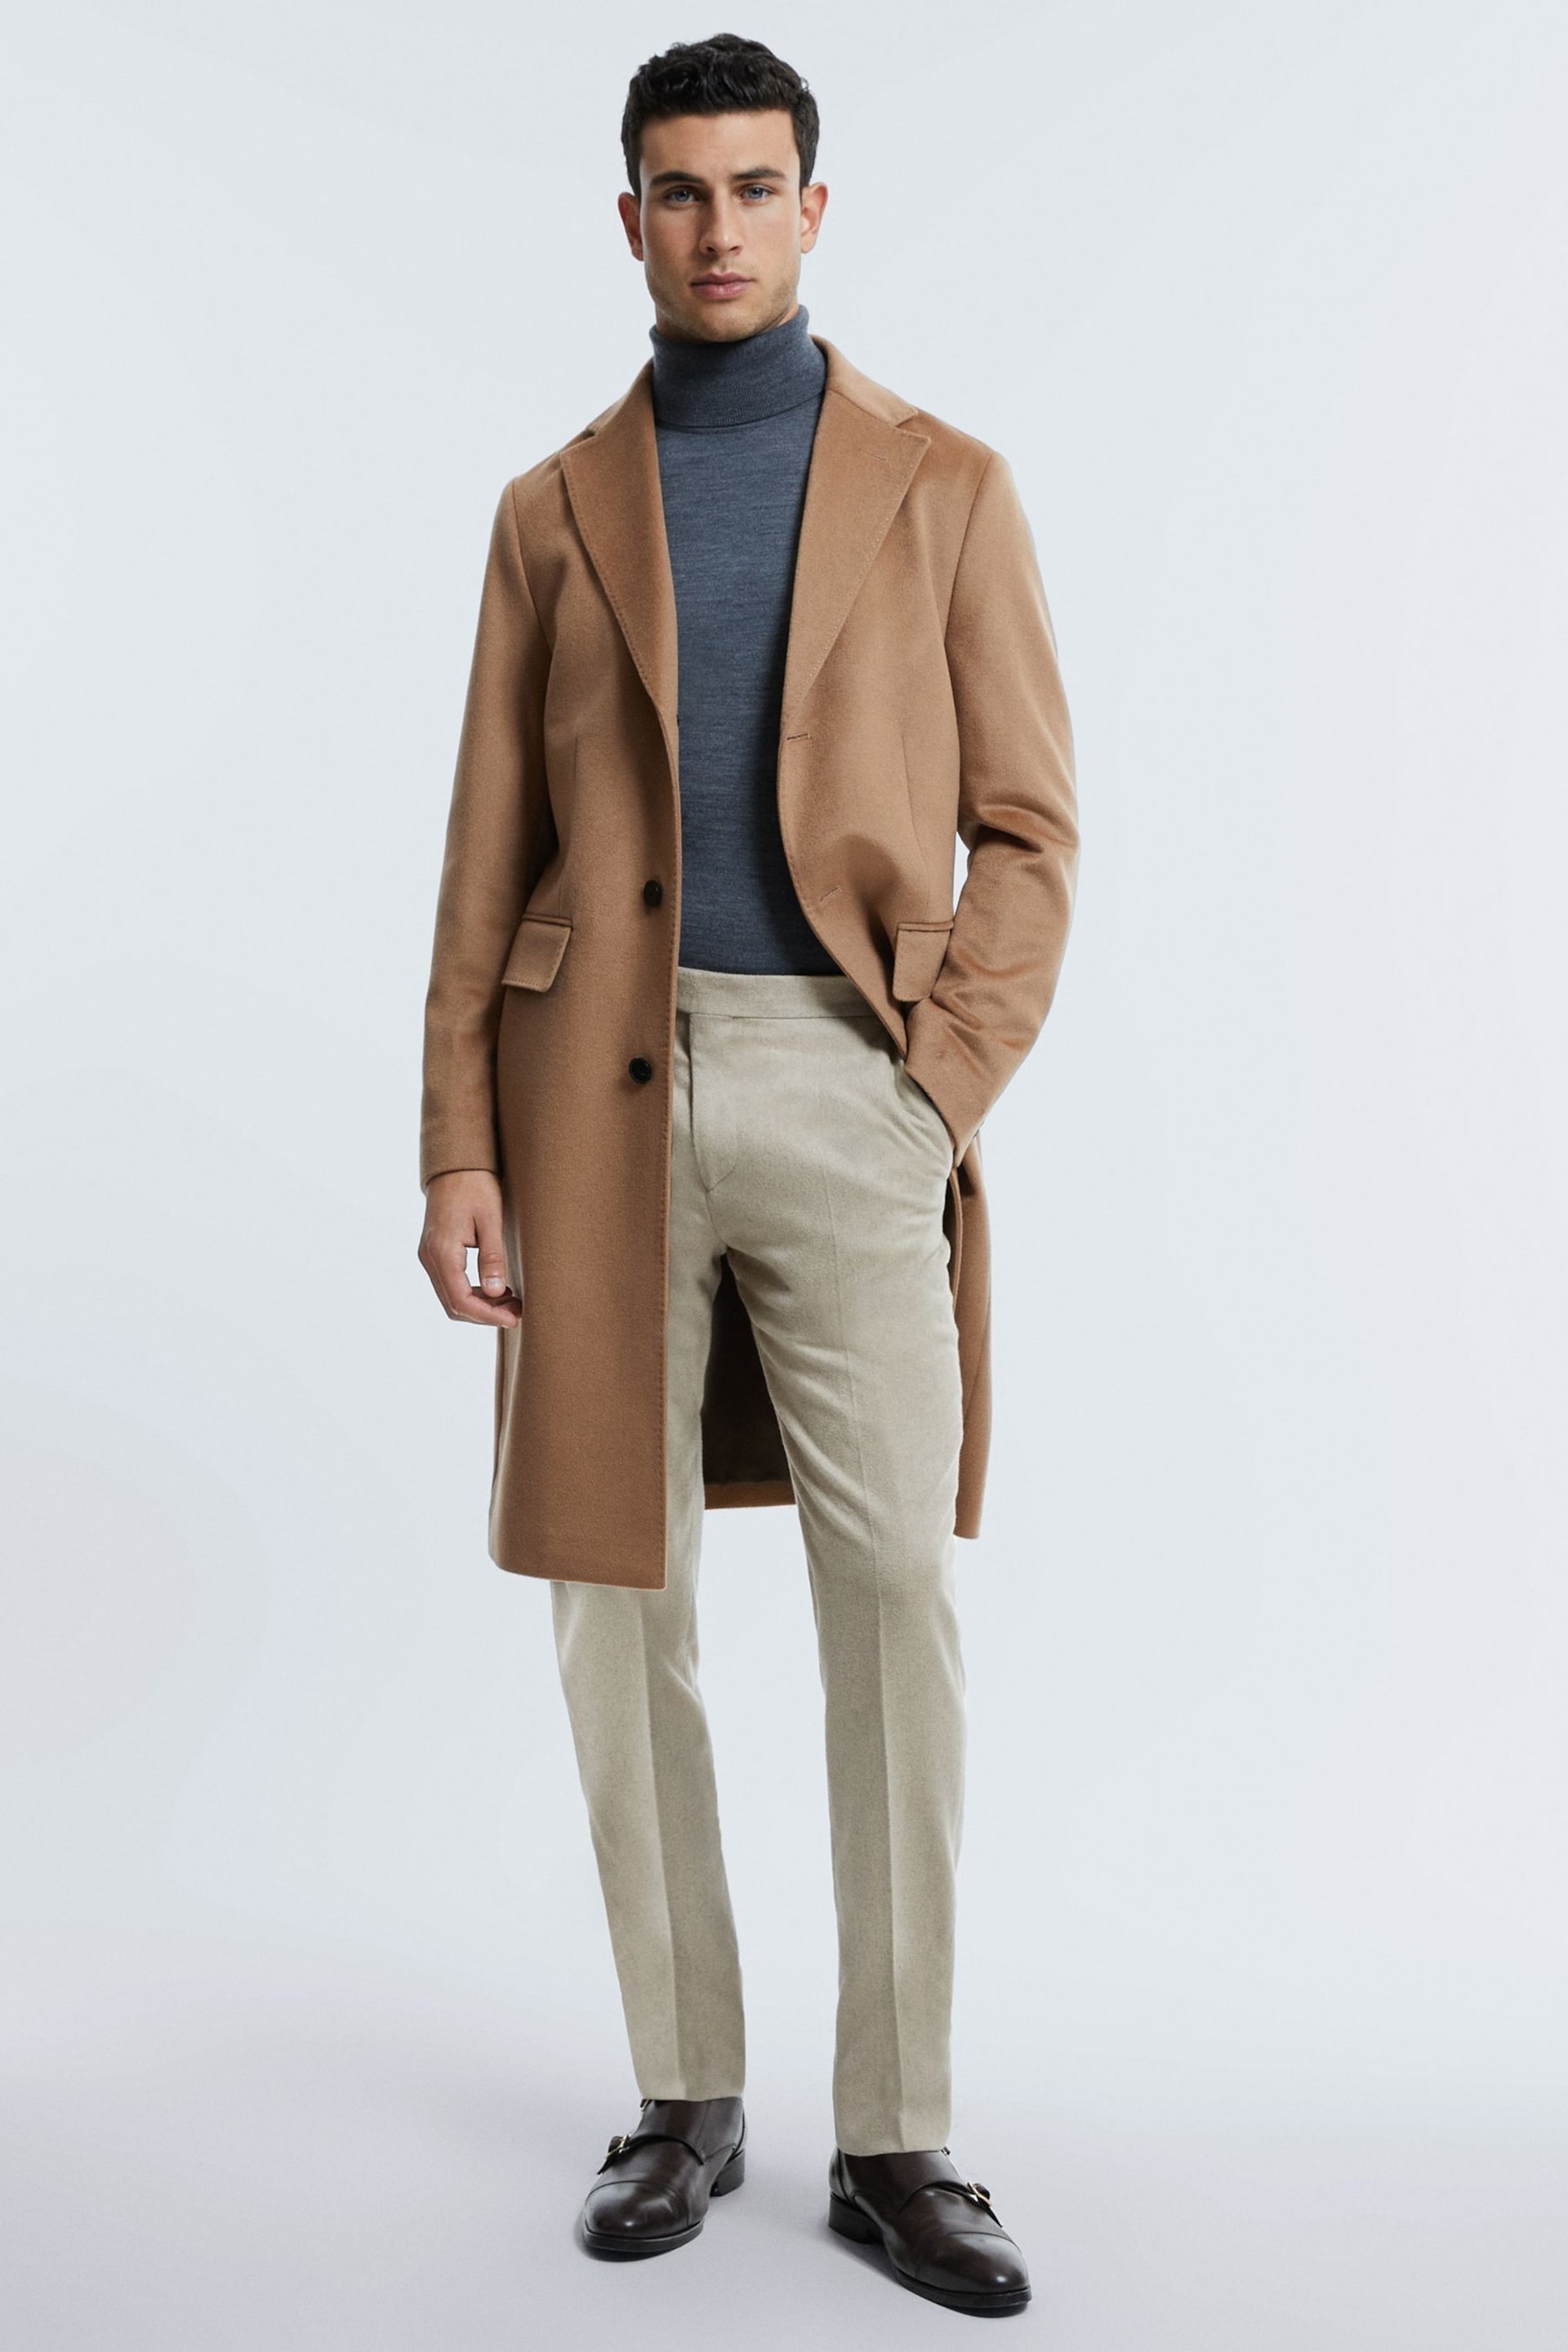 Reiss Camel Tycho Atelier Cashmere Single Breasted Coat - Image 1 of 7